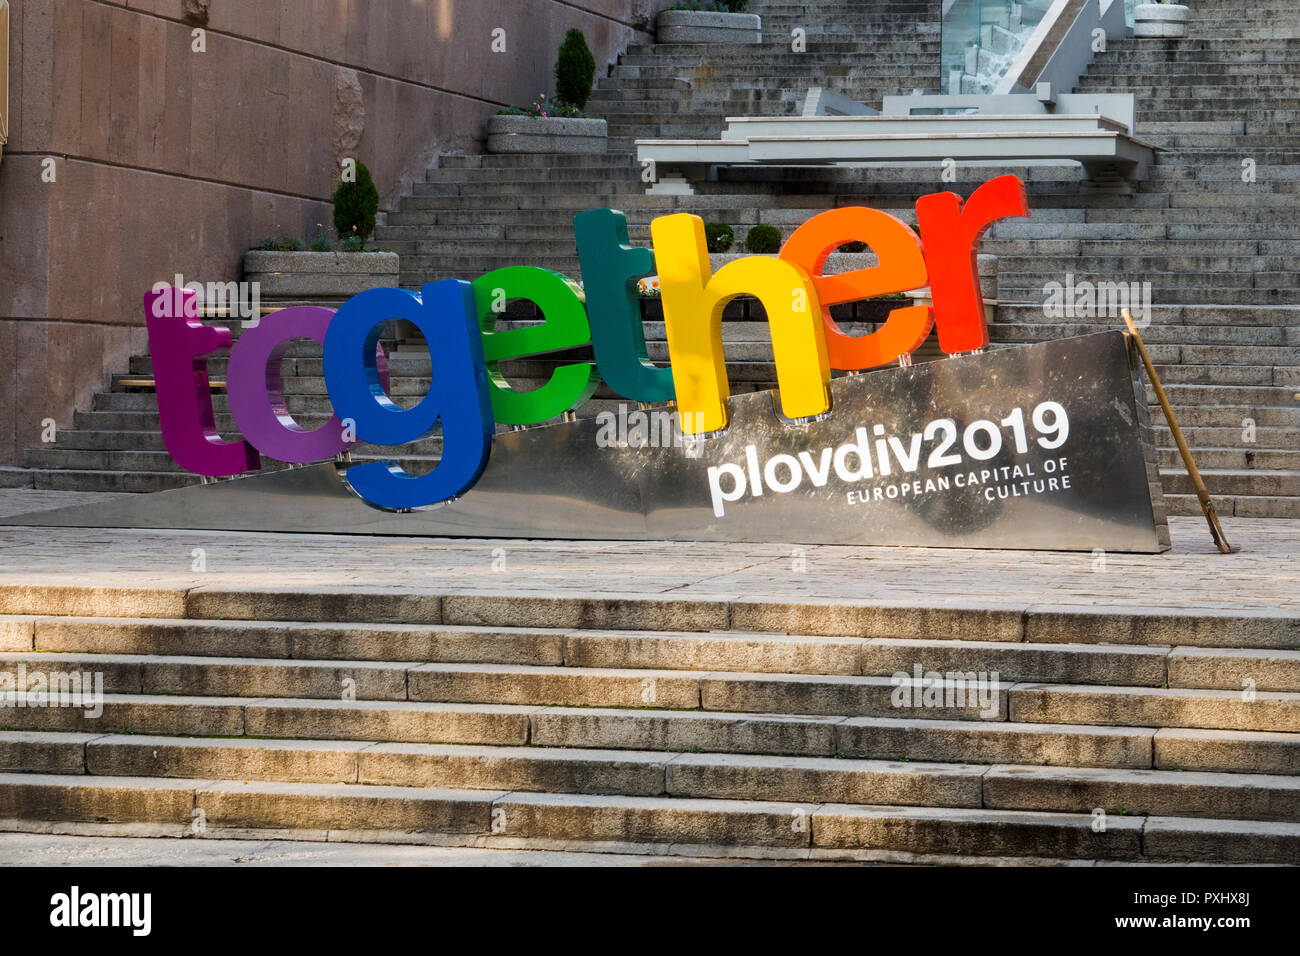 Sign in Plovdiv city centre - Together Plovdiv European capital of culture 2019 Stock Photo